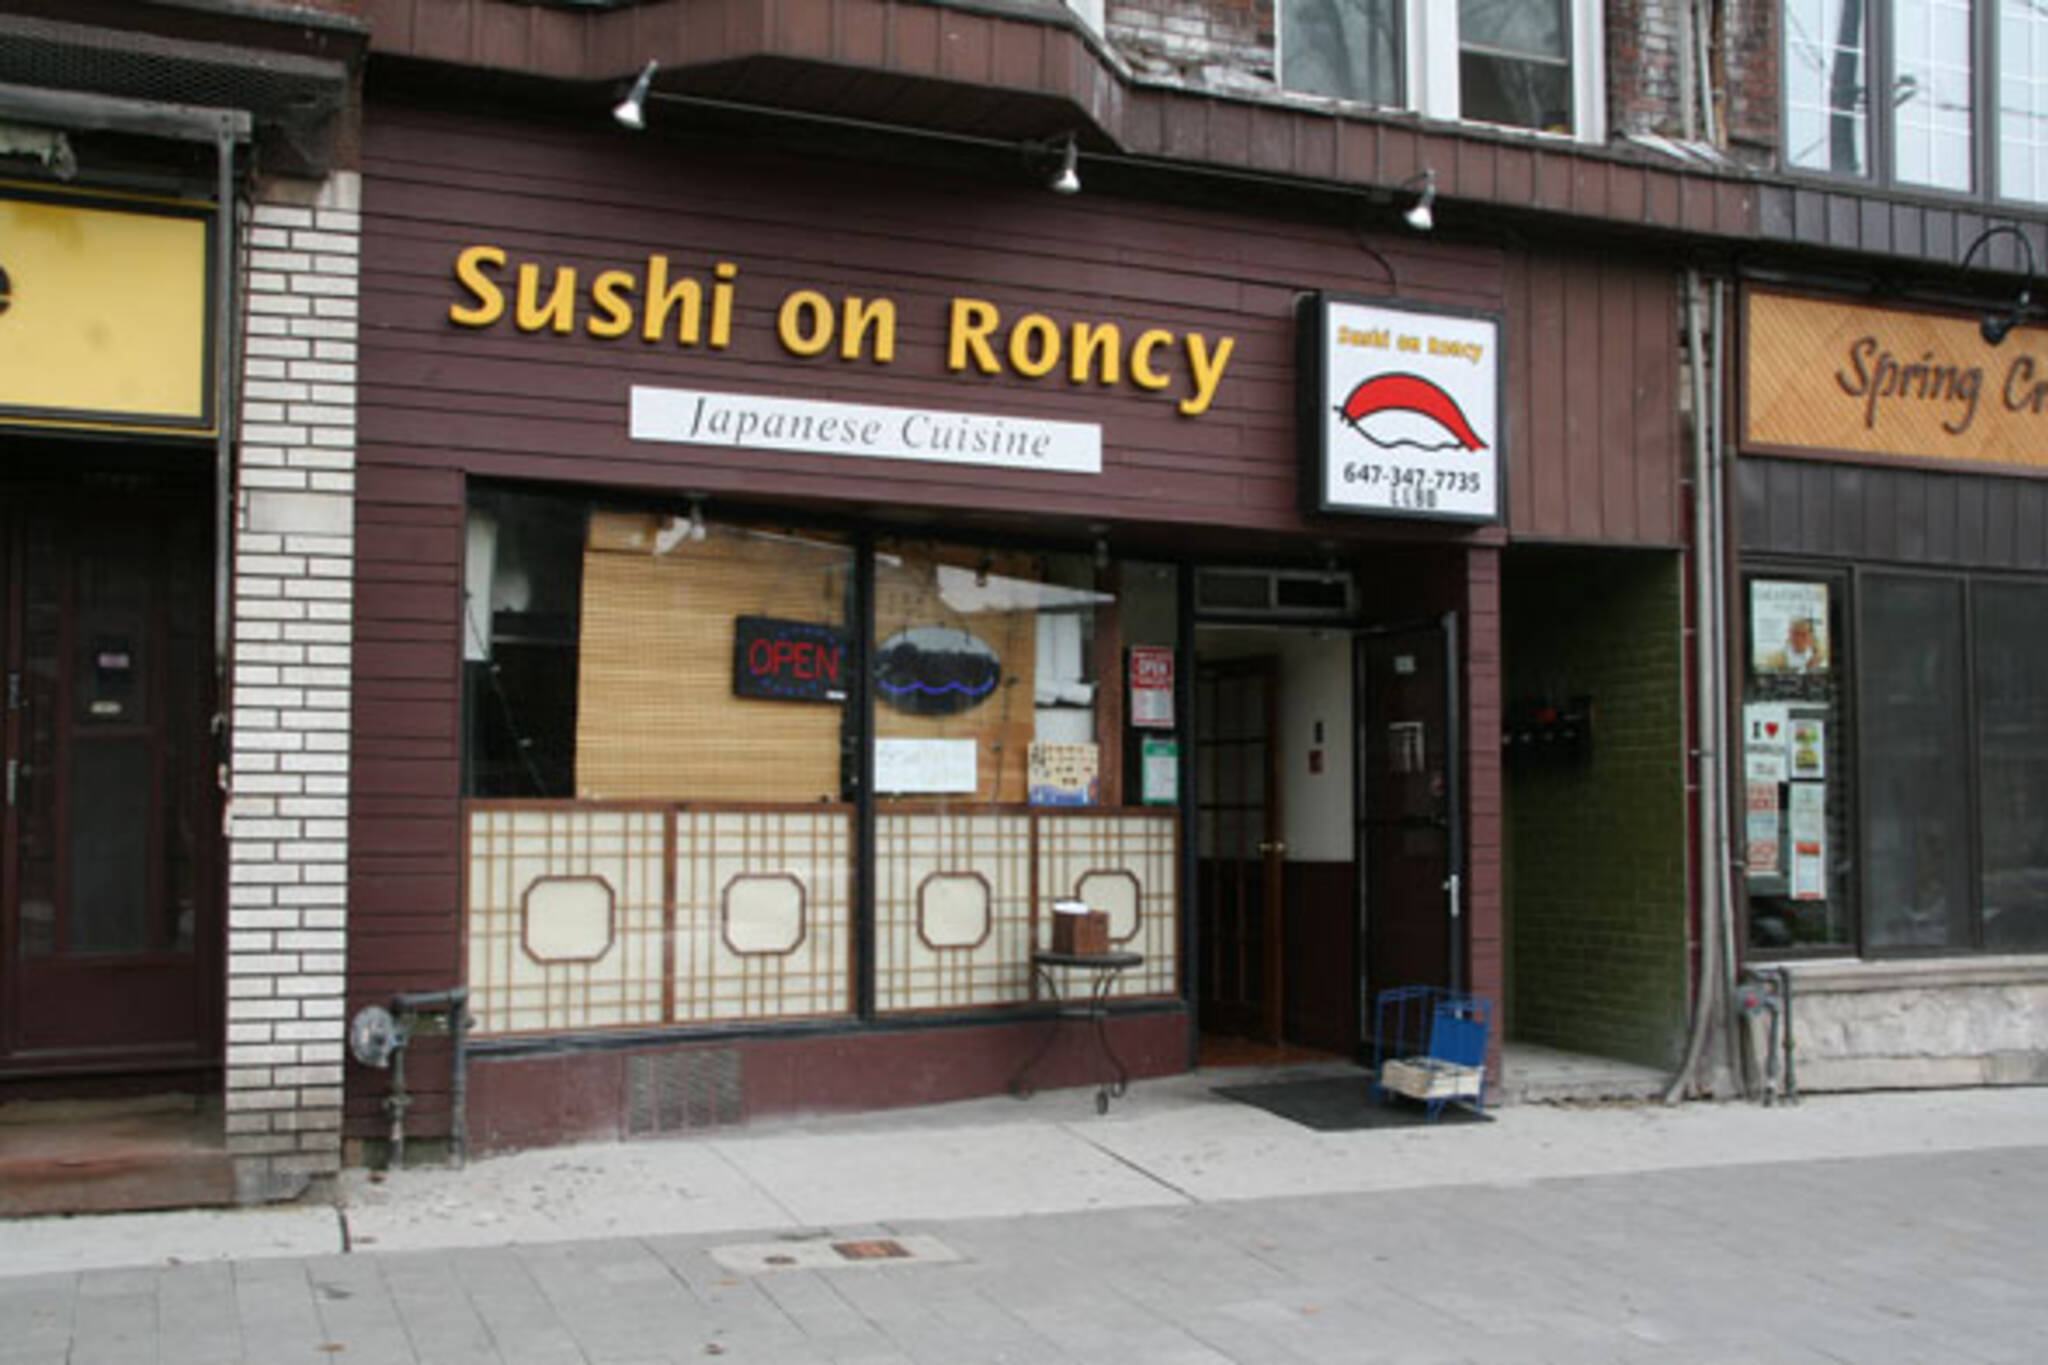 Sushi on Roncy